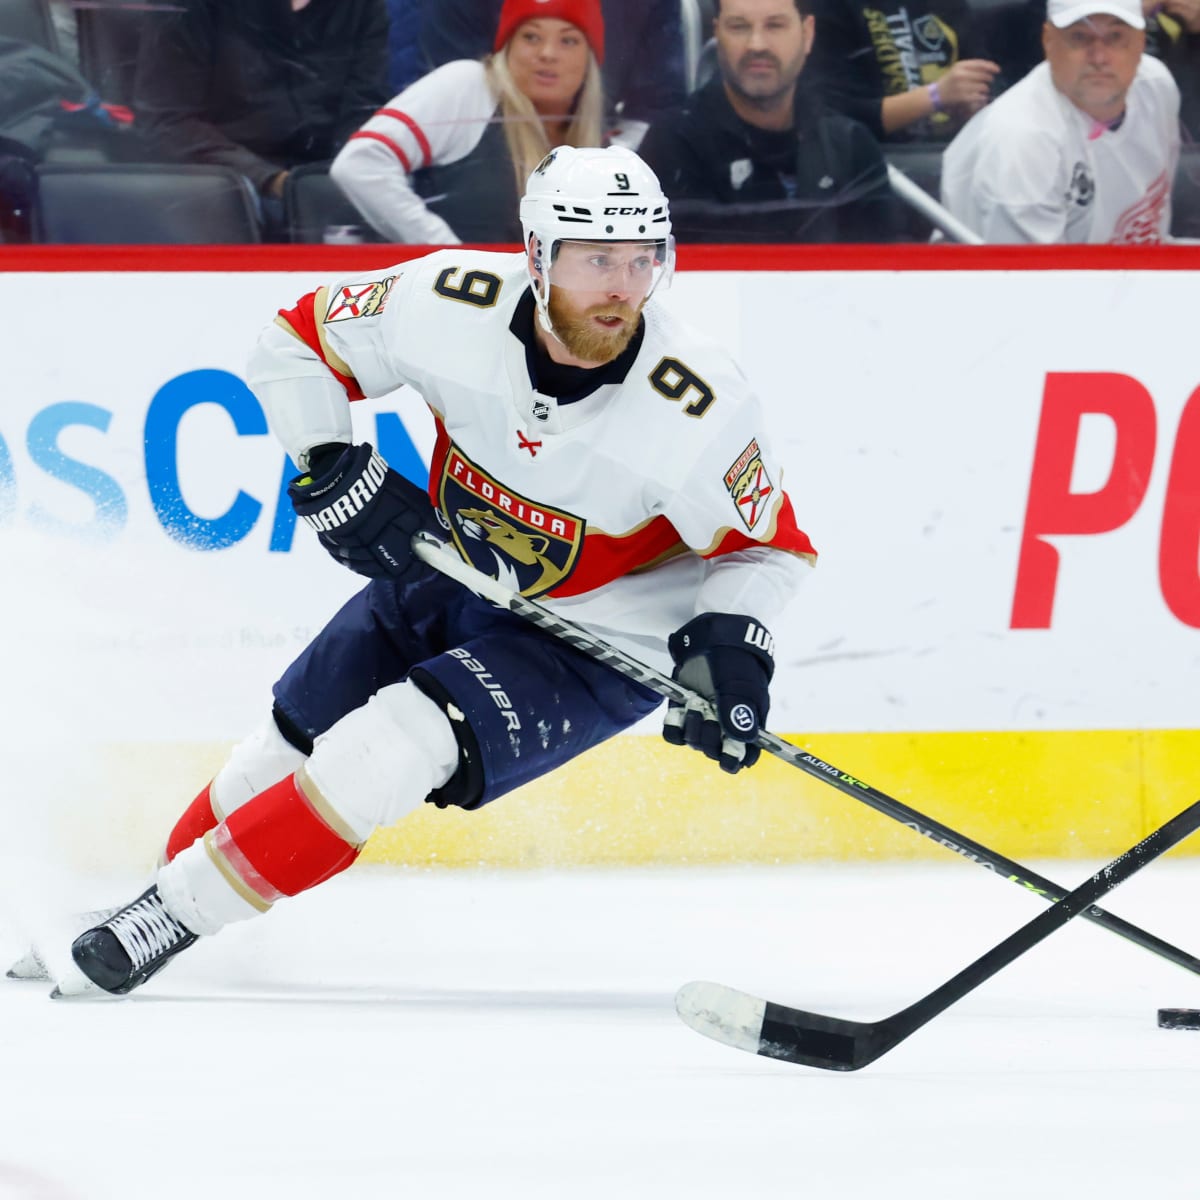 Florida Panthers at Boston Bruins Live Stream Watch Online, TV Channel, Start Time - How to Watch and Stream Major League and College Sports